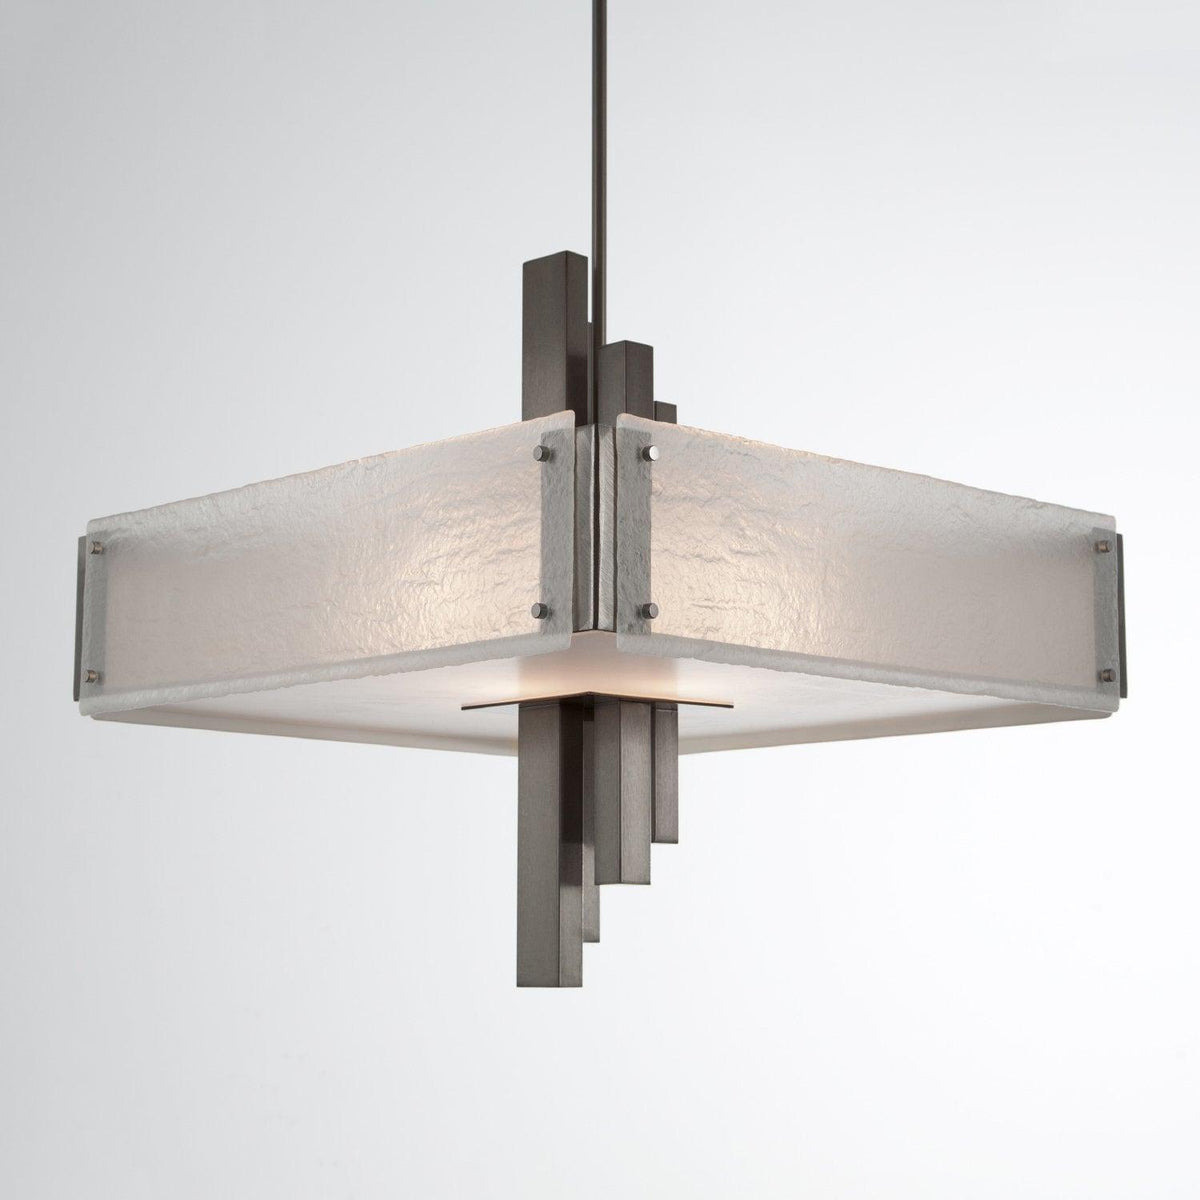 Hammerton Studio - Carlyle Square Chandelier, 24-Inch - CHB0033-0A-SN-FG-001-E2 | Montreal Lighting & Hardware